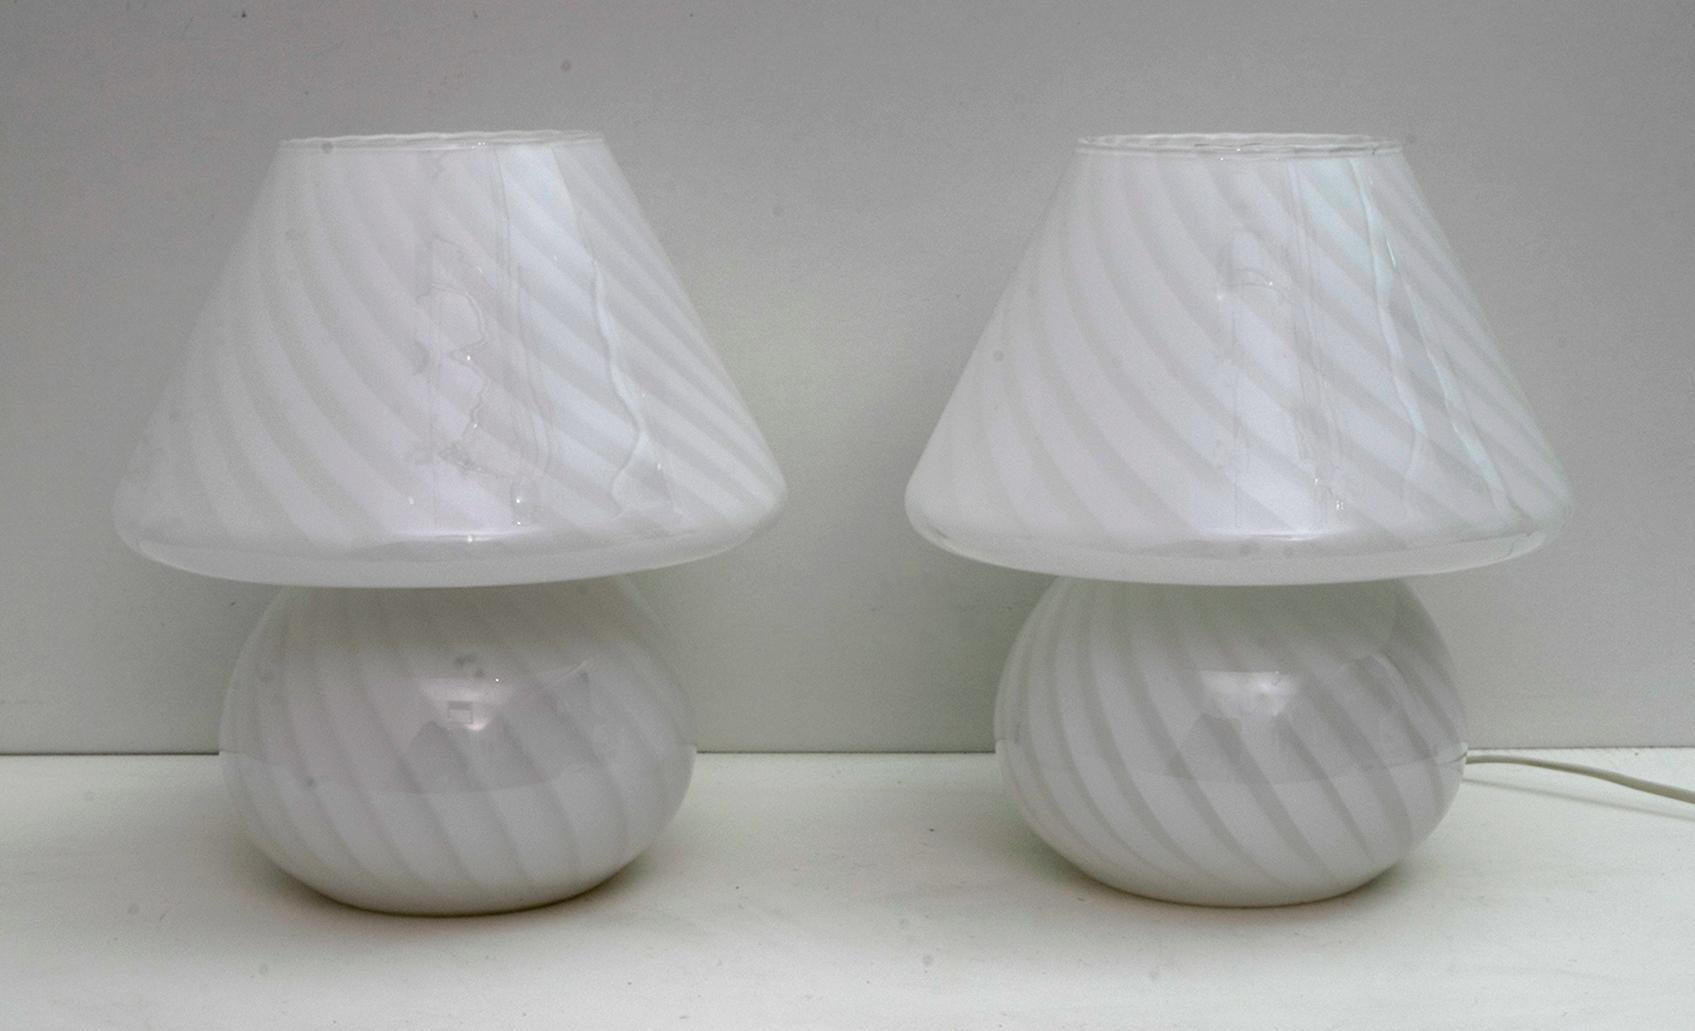 This pair of Murano glass mushroom lamps were produced by Venini in the 1970s.

For over ninety years the Venini brand has been characterized by craftsmanship and tradition in the international glass objects market. The first artistic director